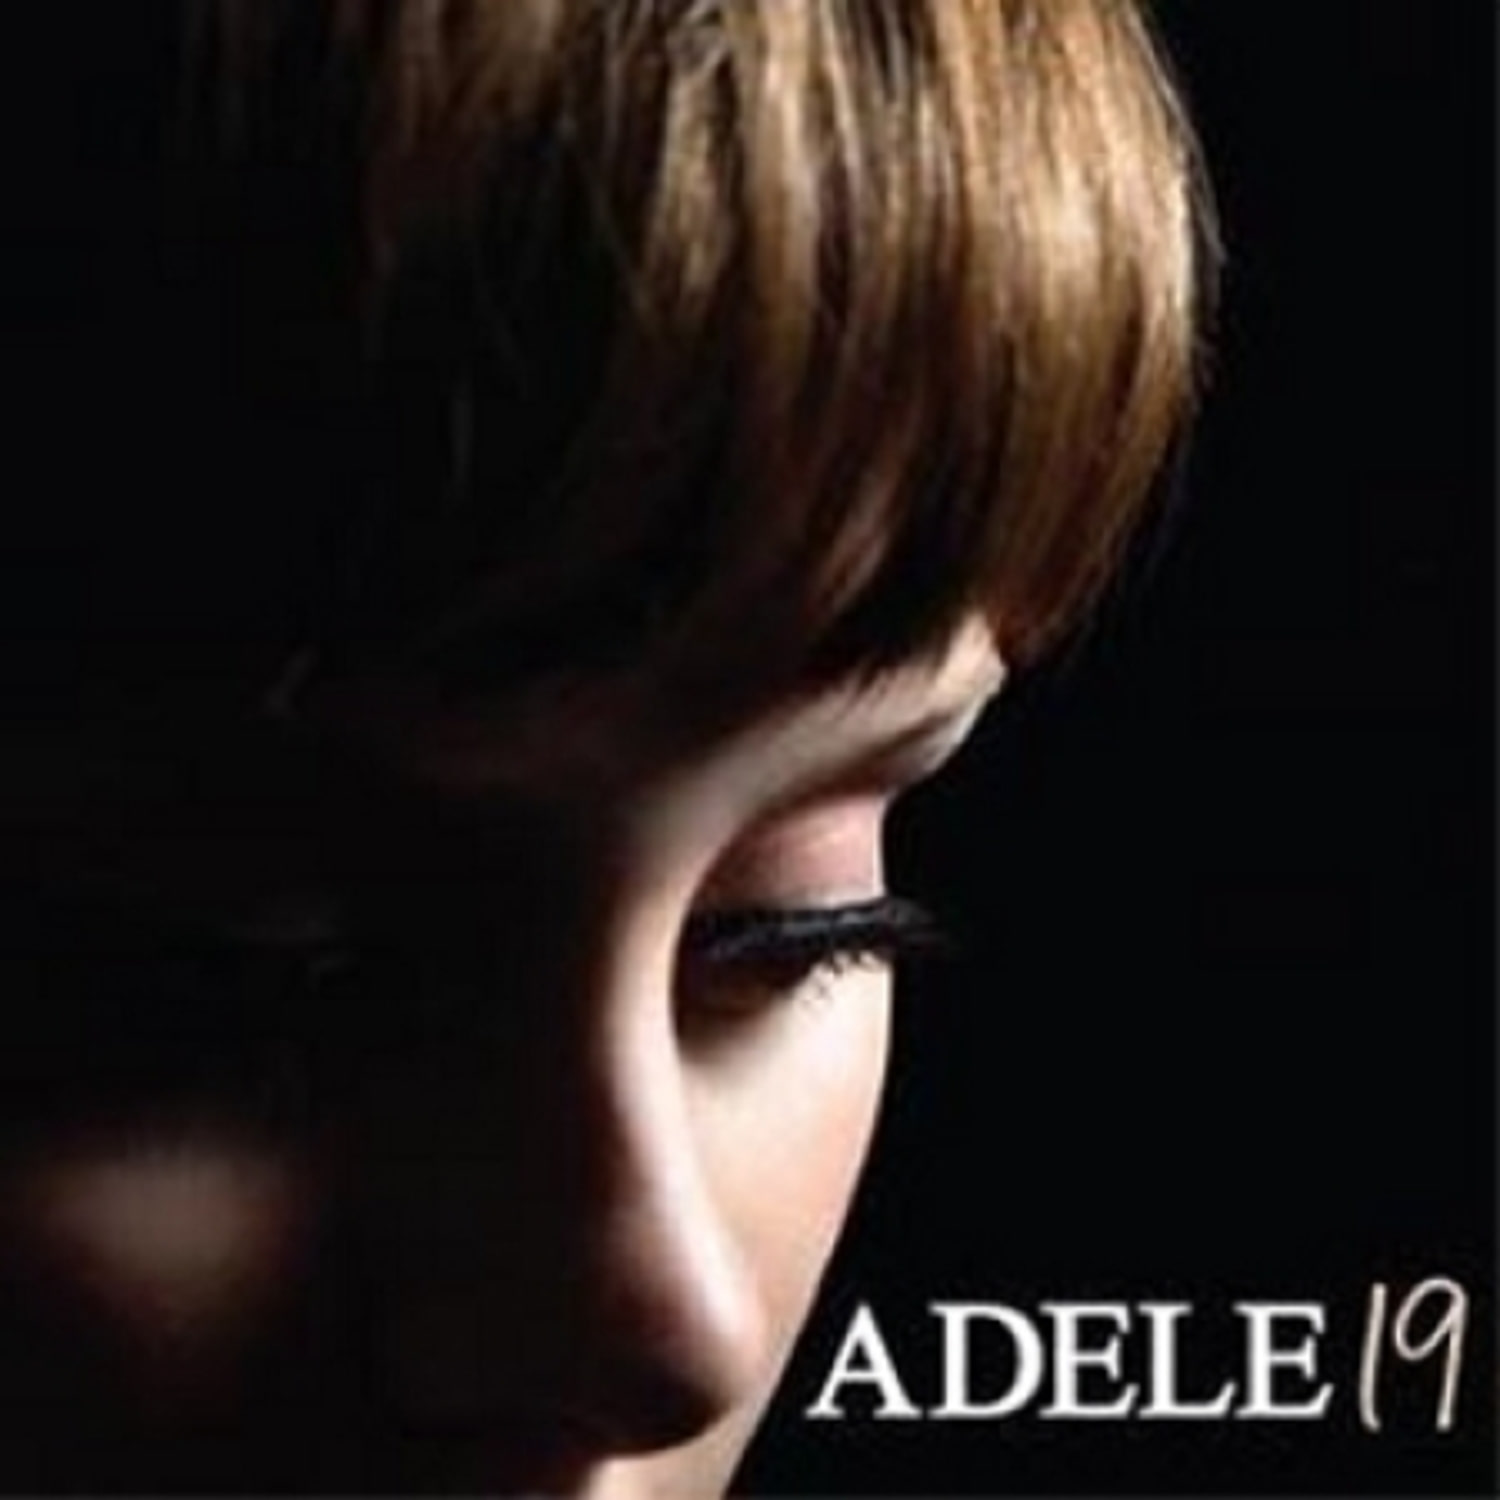 ADELE (아델) - 19 [2CD DELUXE EDITION] 